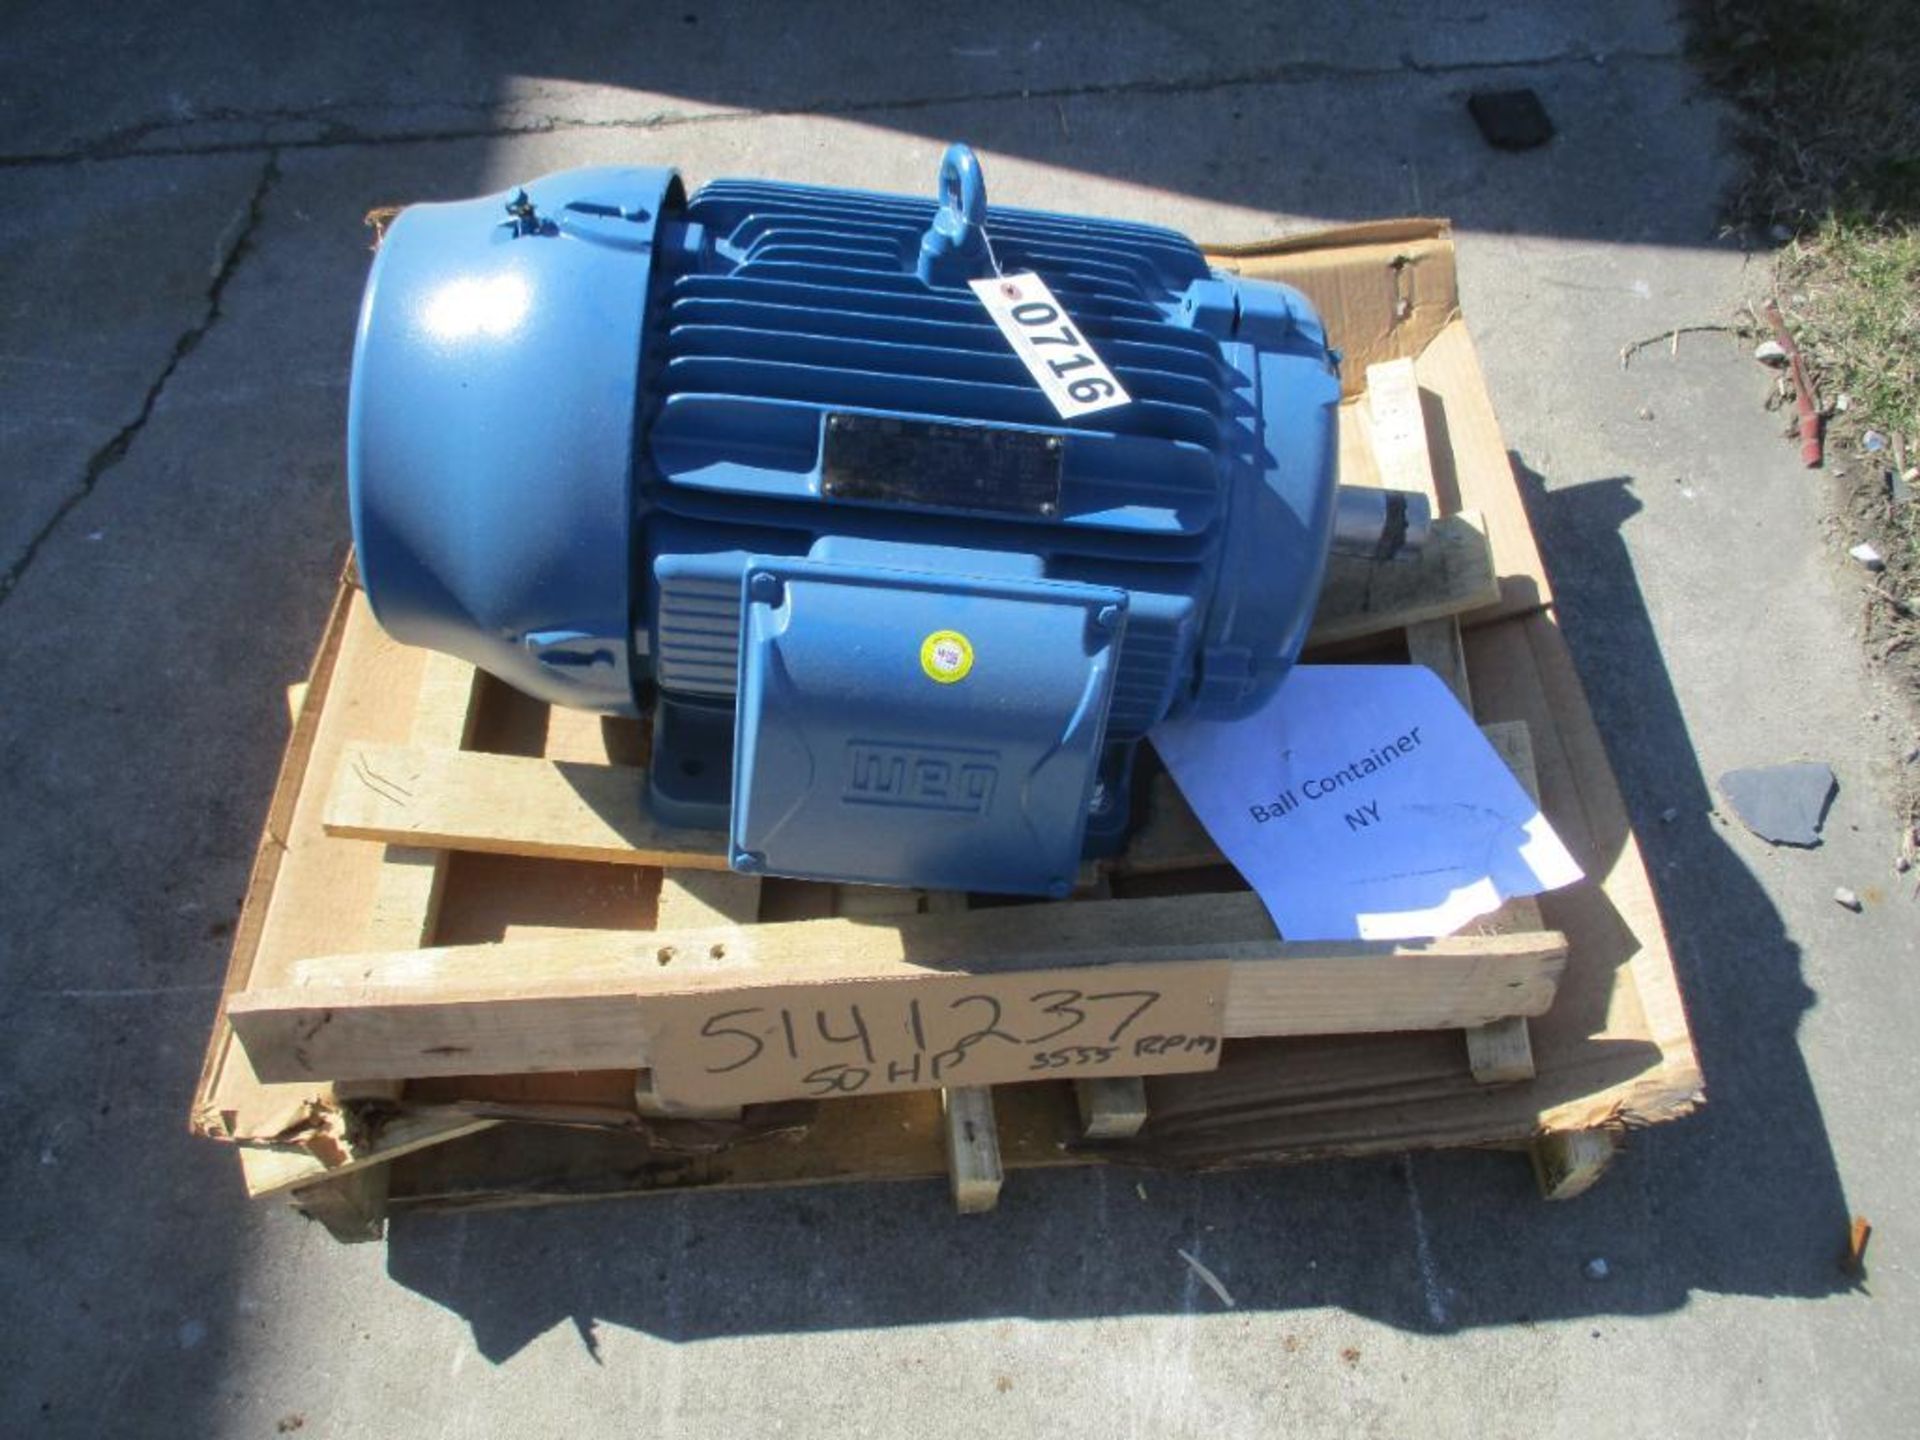 WEG 3 PHASE 50HP 3550RPM 324/6TS FRAME A/C MOTOR P/N 05036ET3E326TS-W22 435# LBS (THIS LOT IS FOB KN